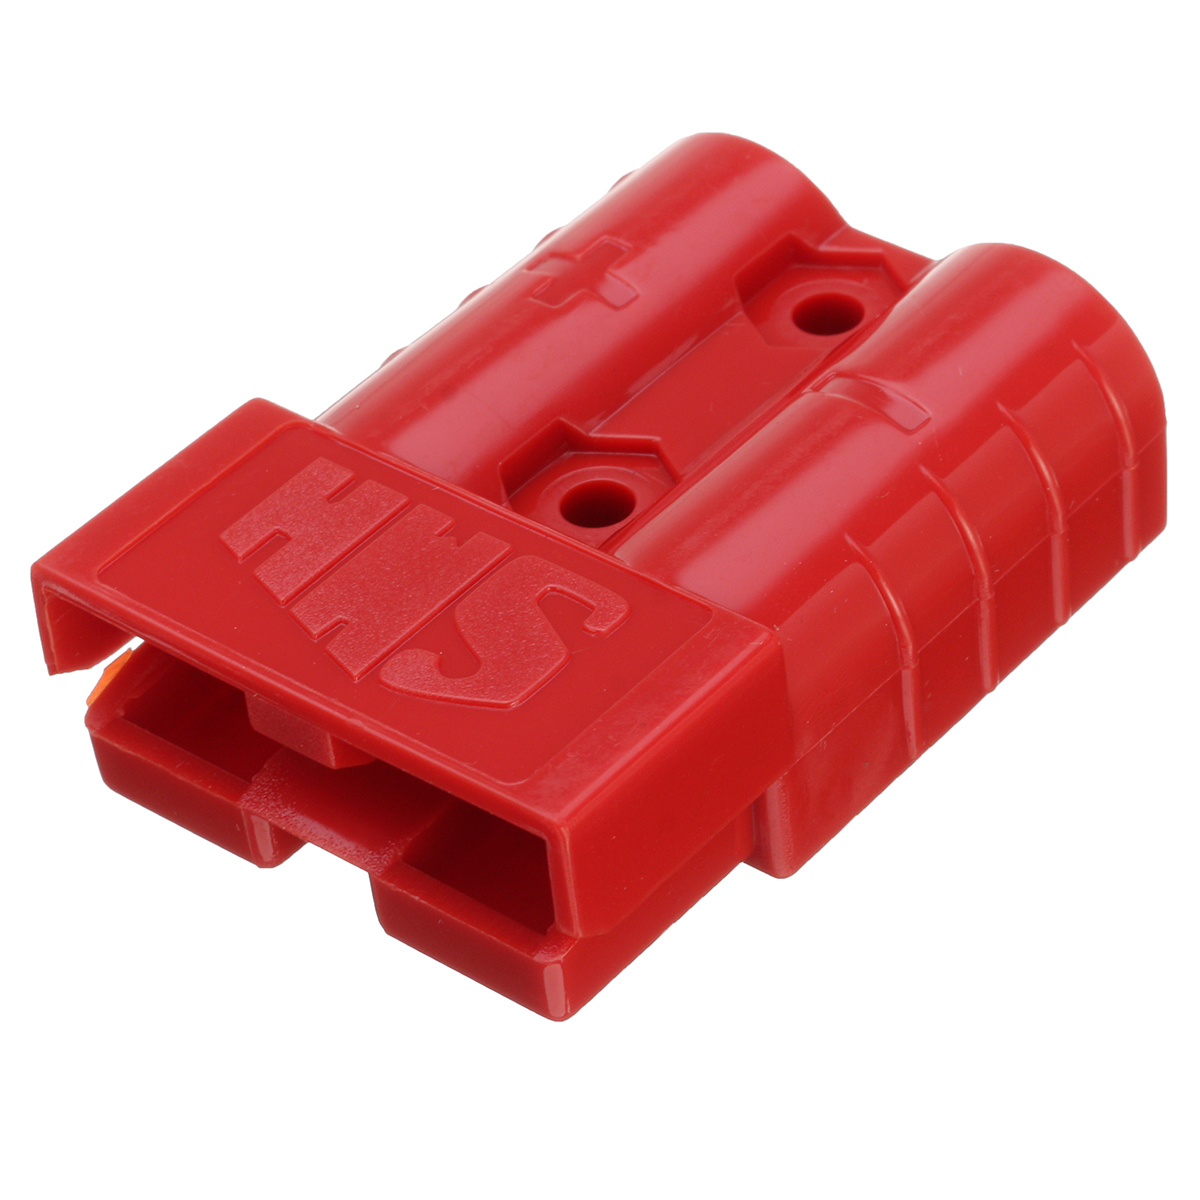 Excellway-50A-8AWG-Battery-Quick-Connector-Plug-Connect-Terminal-Disconnect-Winch-Trailer-Red-1170740-6